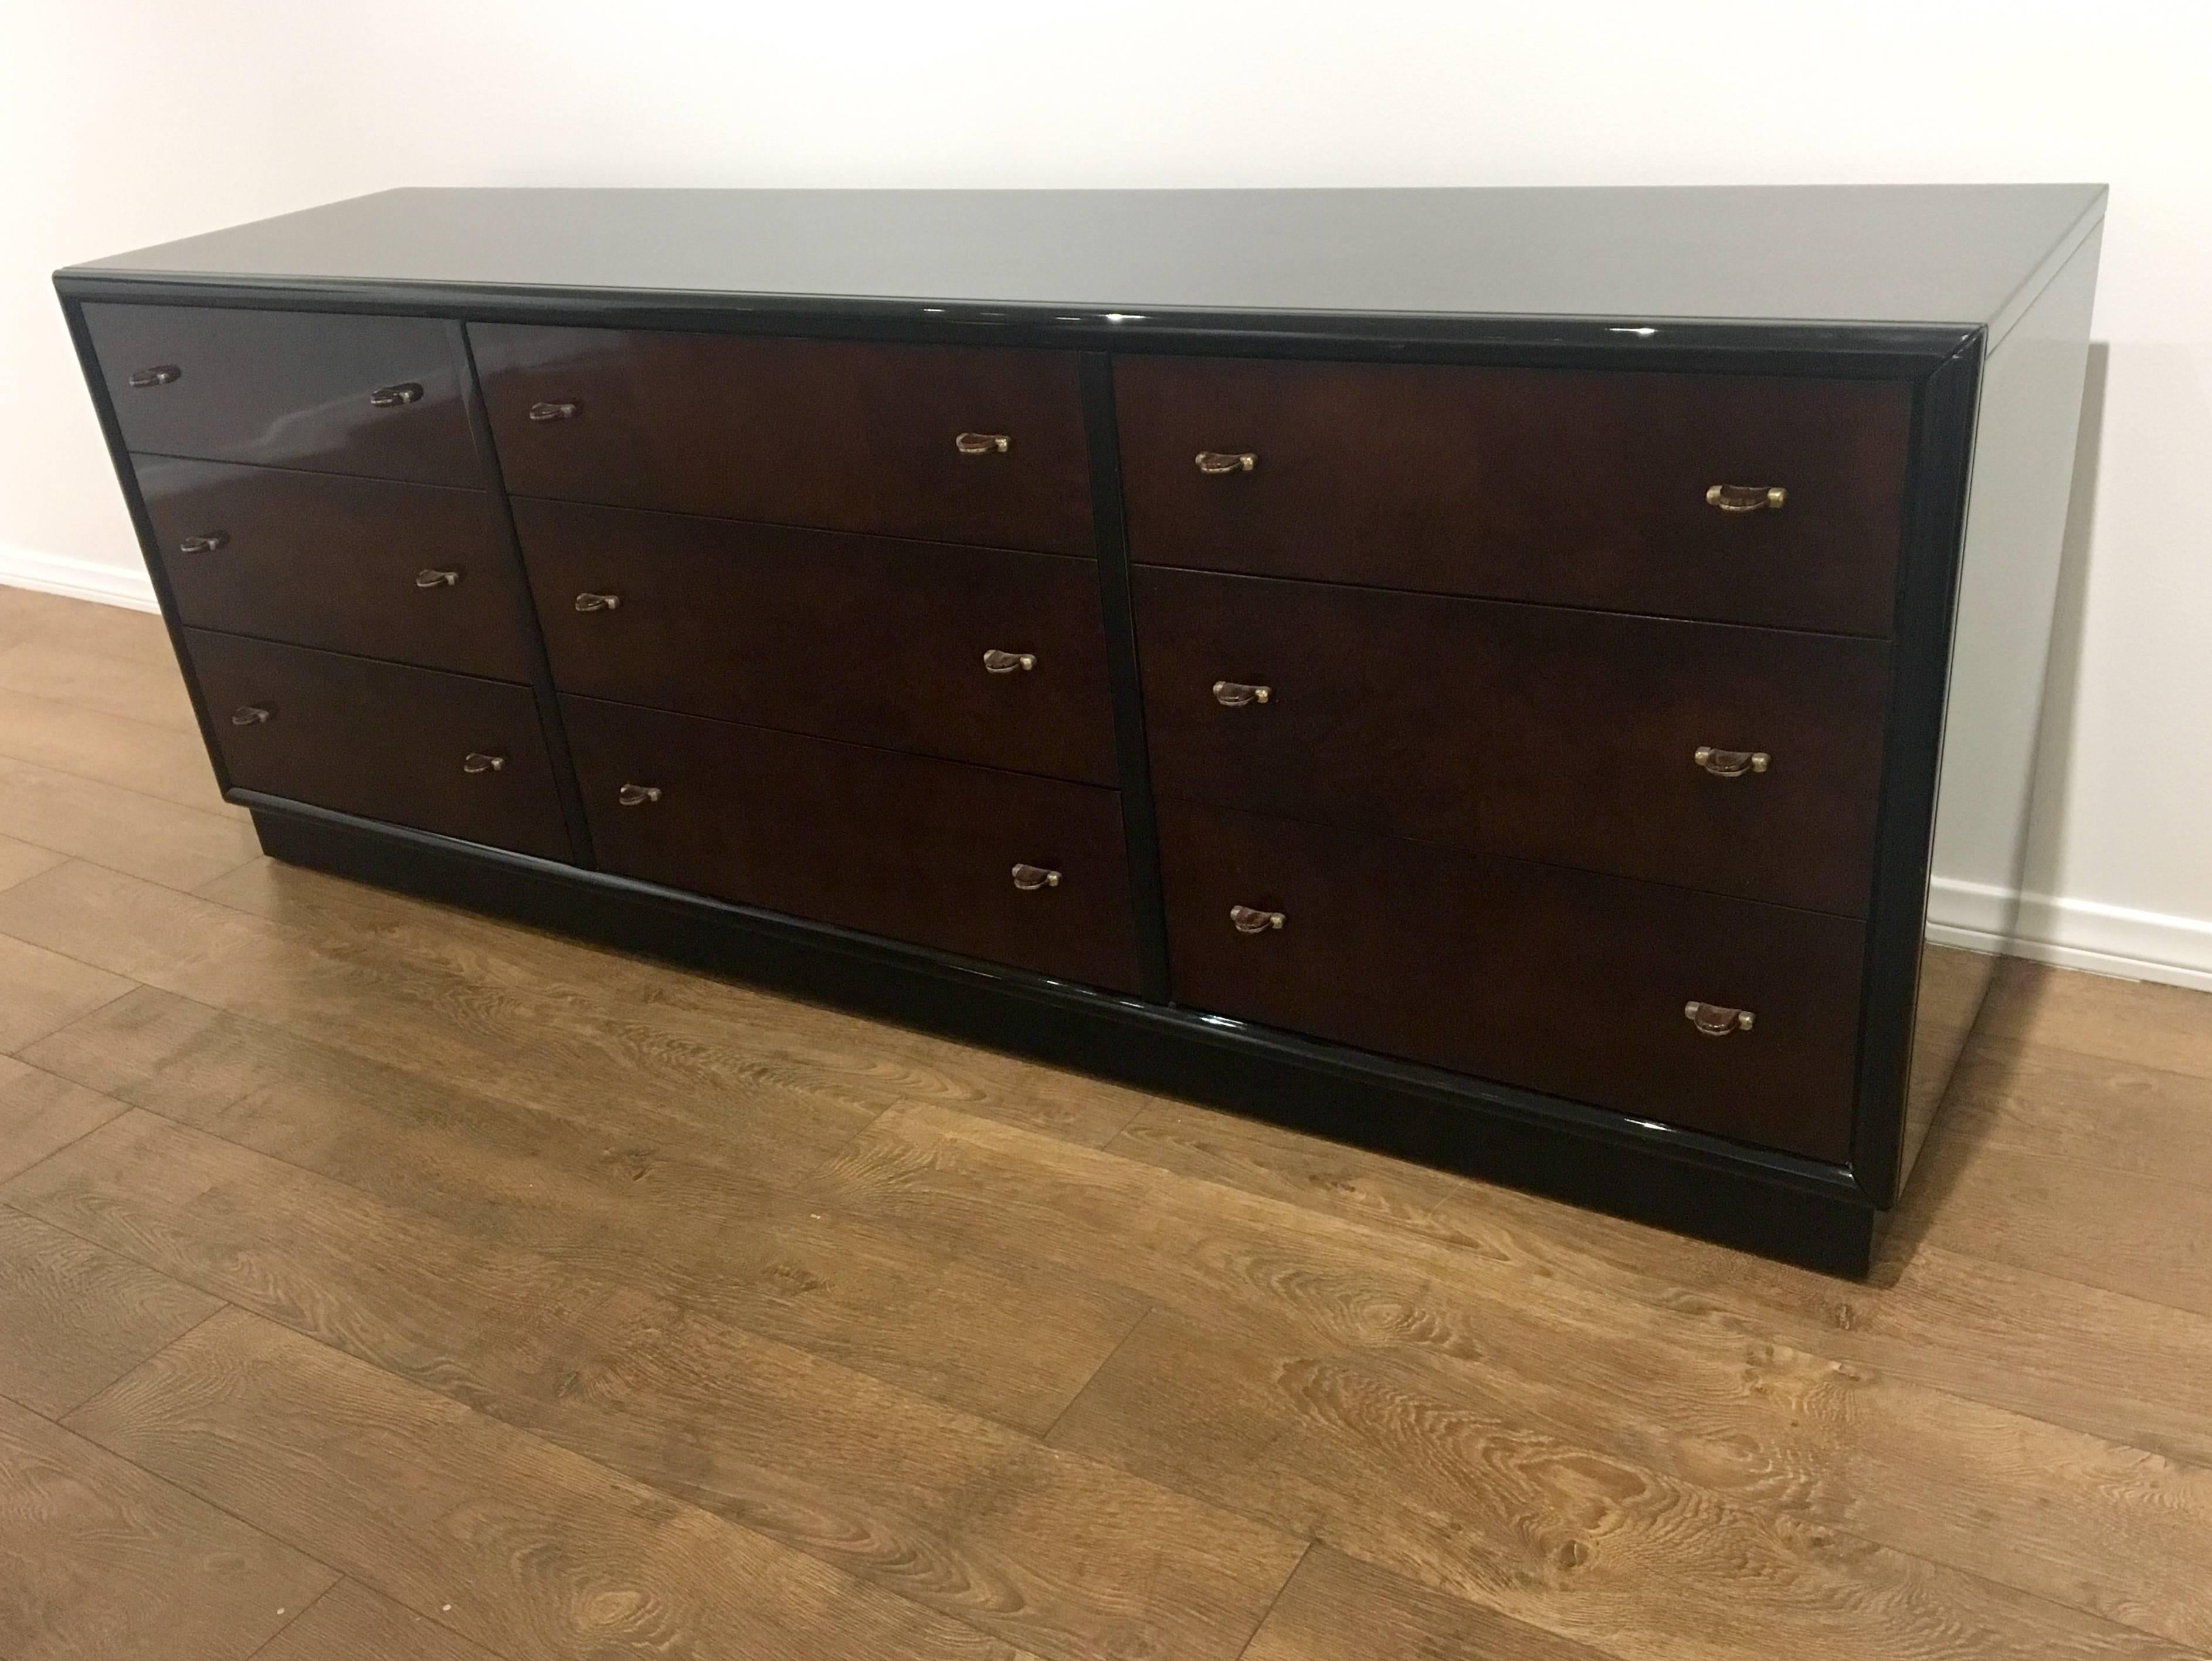 Long nine-drawer long dresser by Henredon from their "Scene Three" collection Smooth black lacquer frames vibrant Myrtle burl veneer drawer fronts, circa 1980s very clean and nice condition exceptional quality with drawer-pulls are